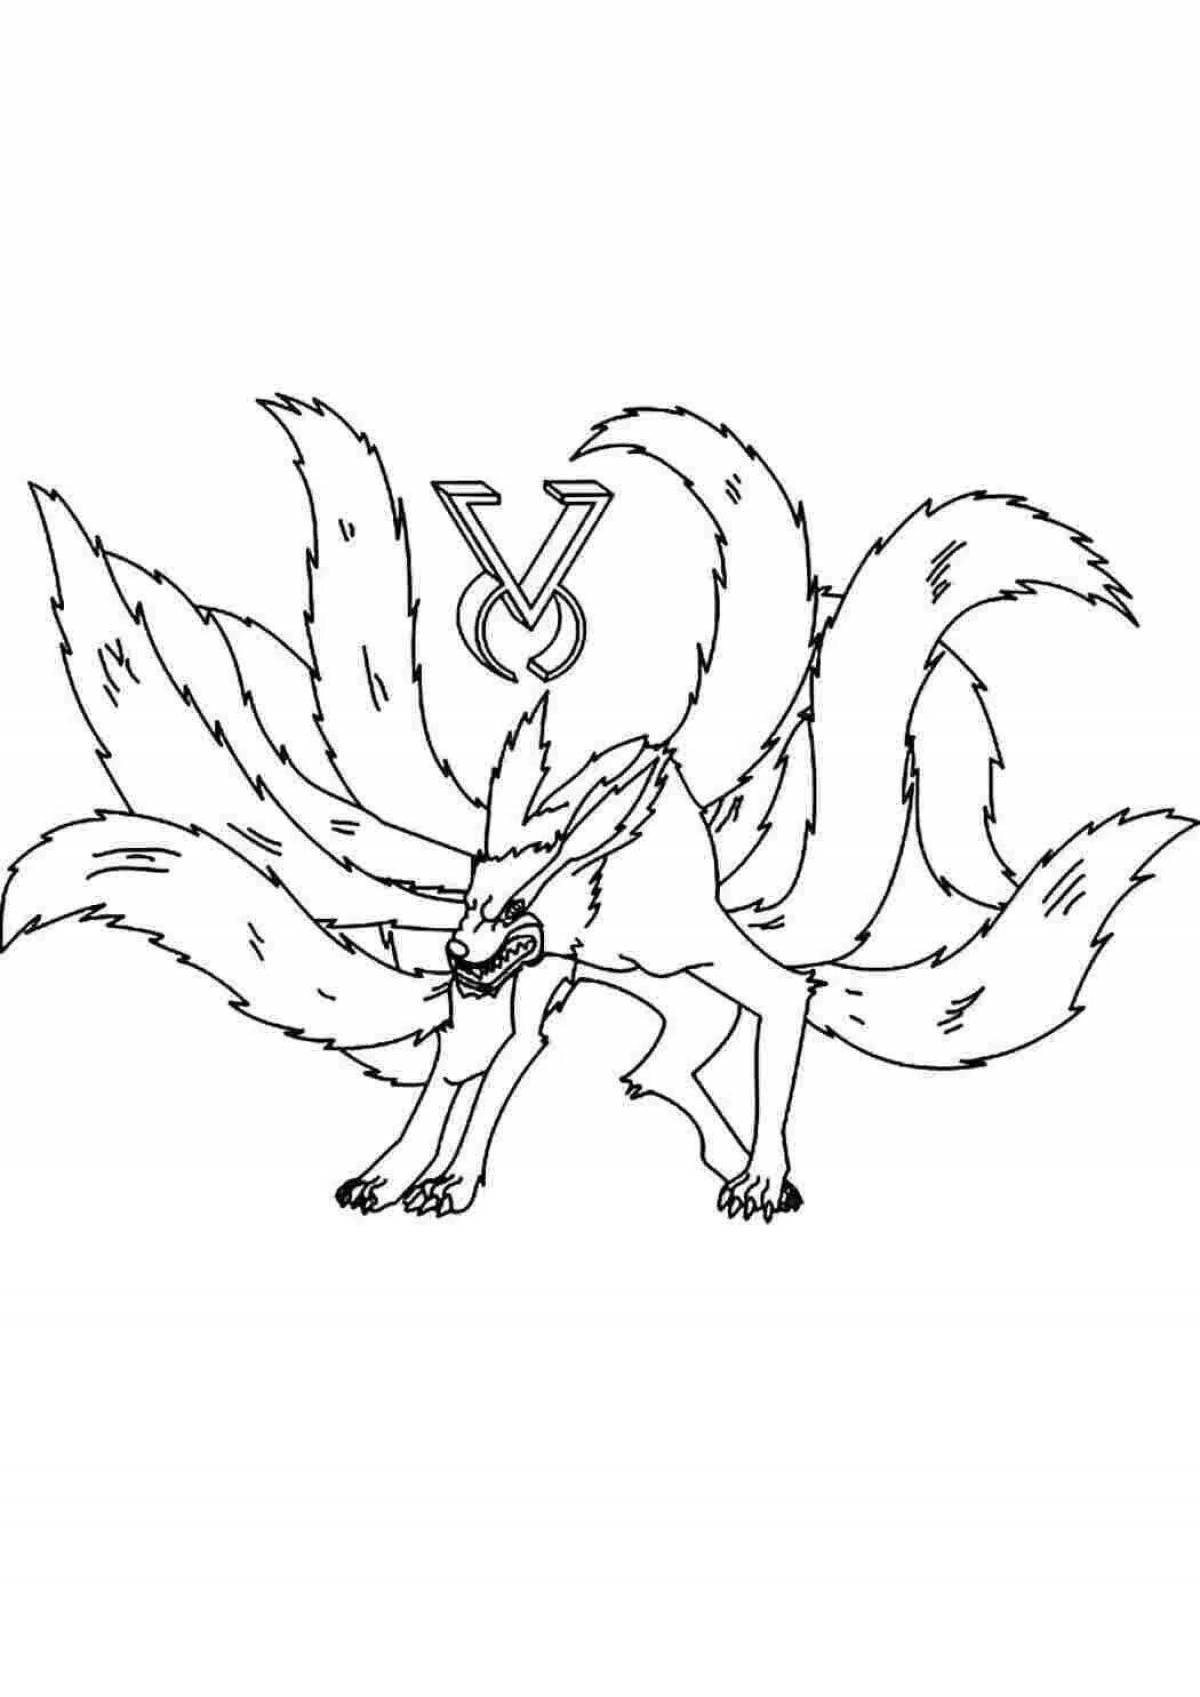 Coloring majestic 9-tailed fox